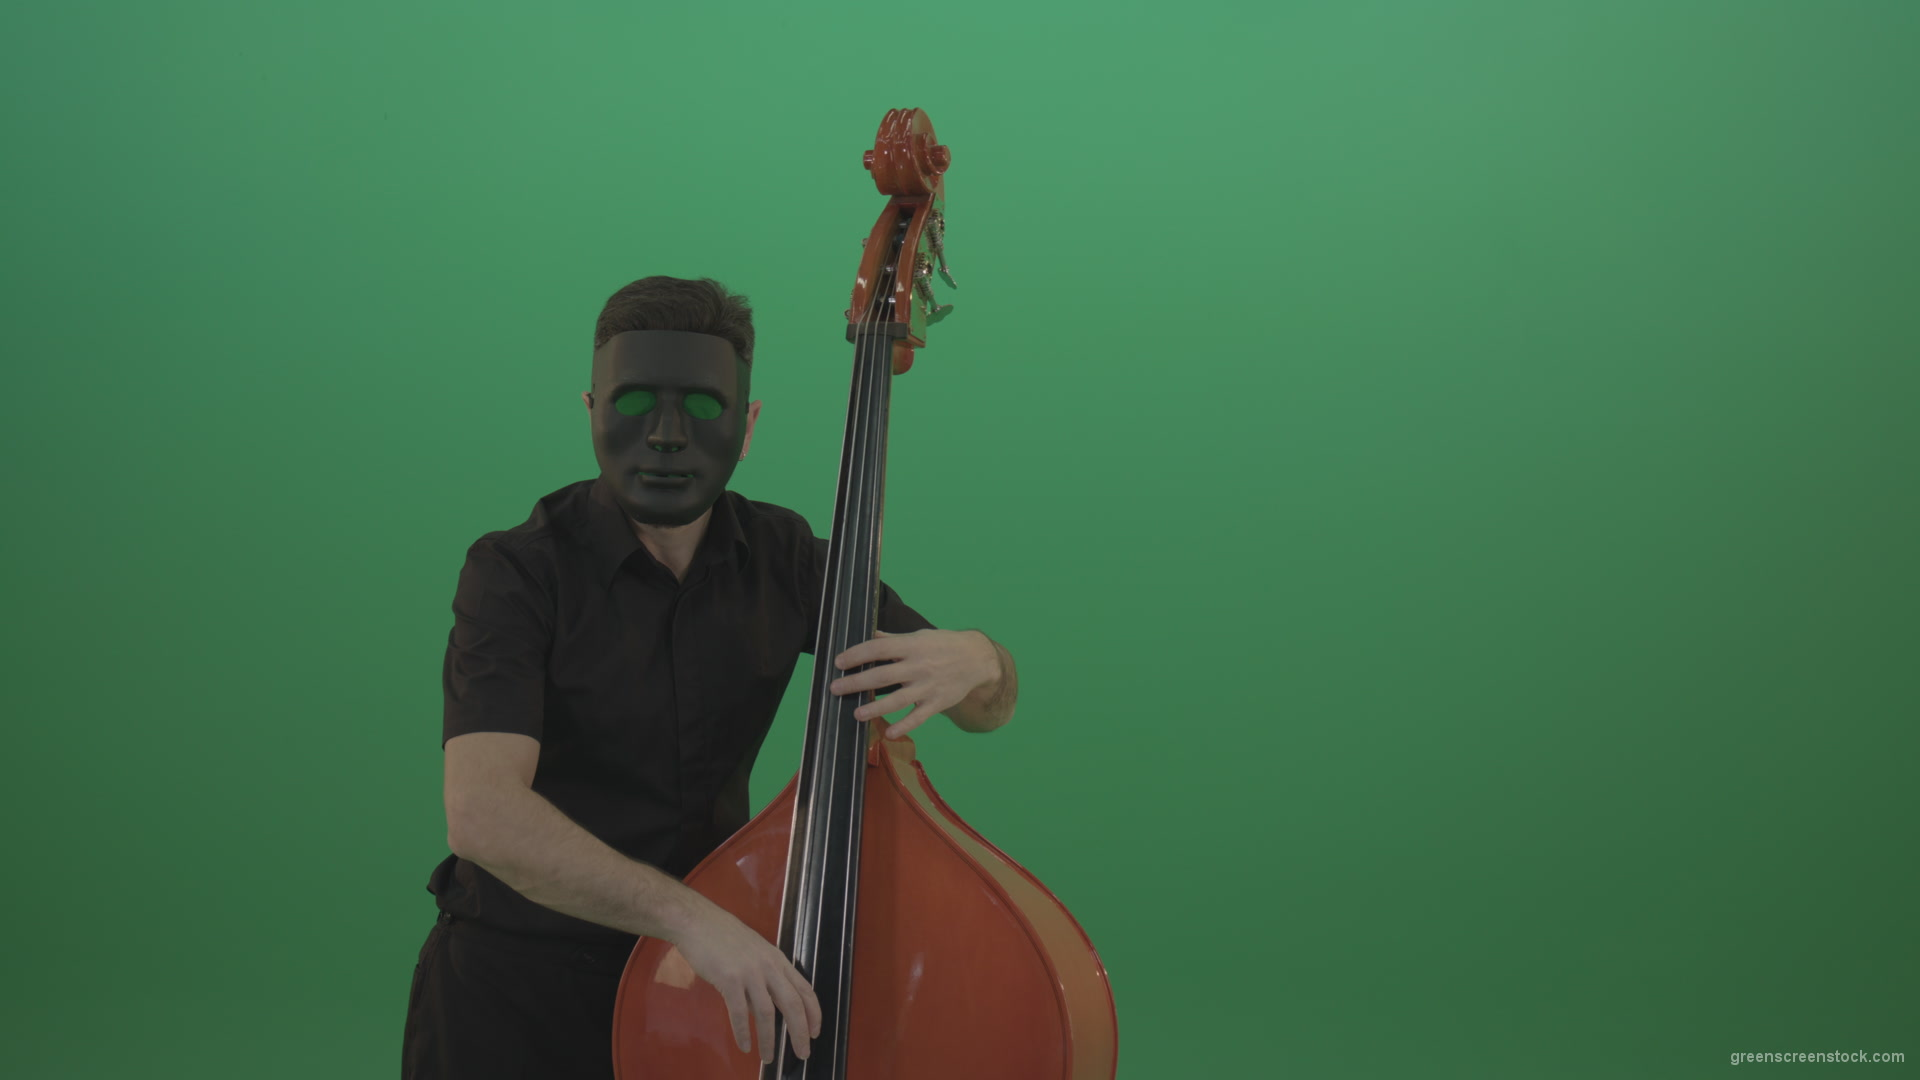 Man-in-black-mask-with-green-eyes-play-music-on-double-bass-instrument-isolated-on-green-screen_006 Green Screen Stock